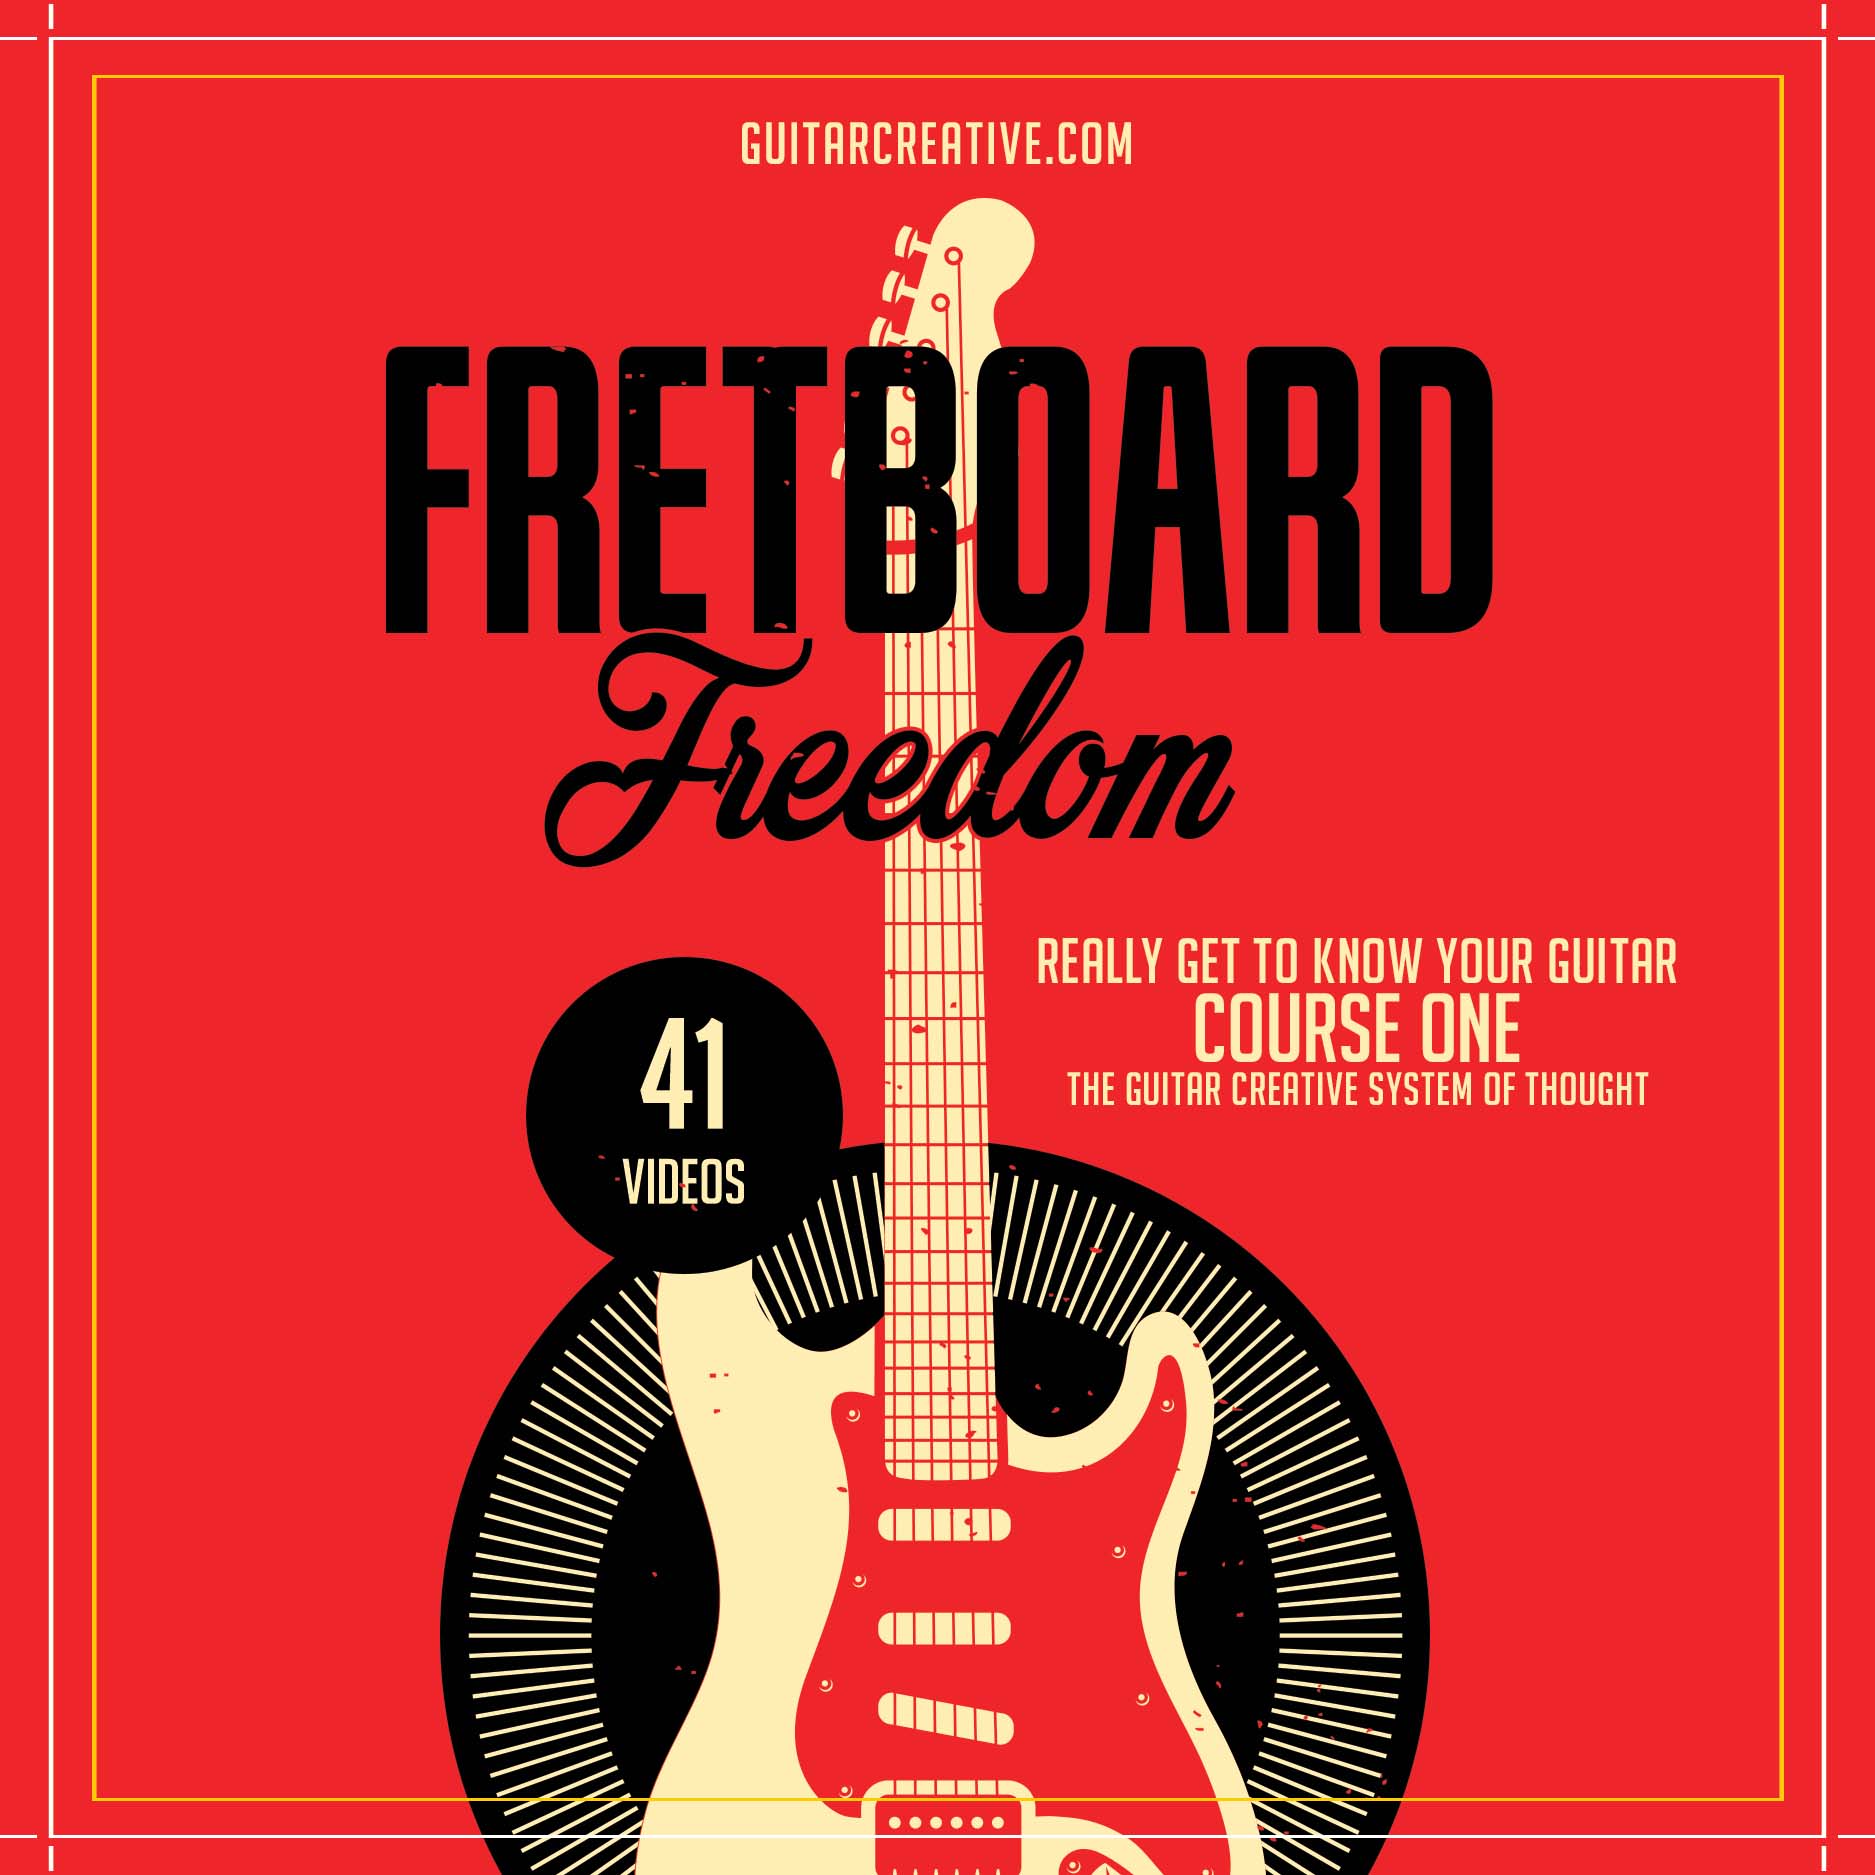 Cover image for the guitar course, Fretboard Freedom